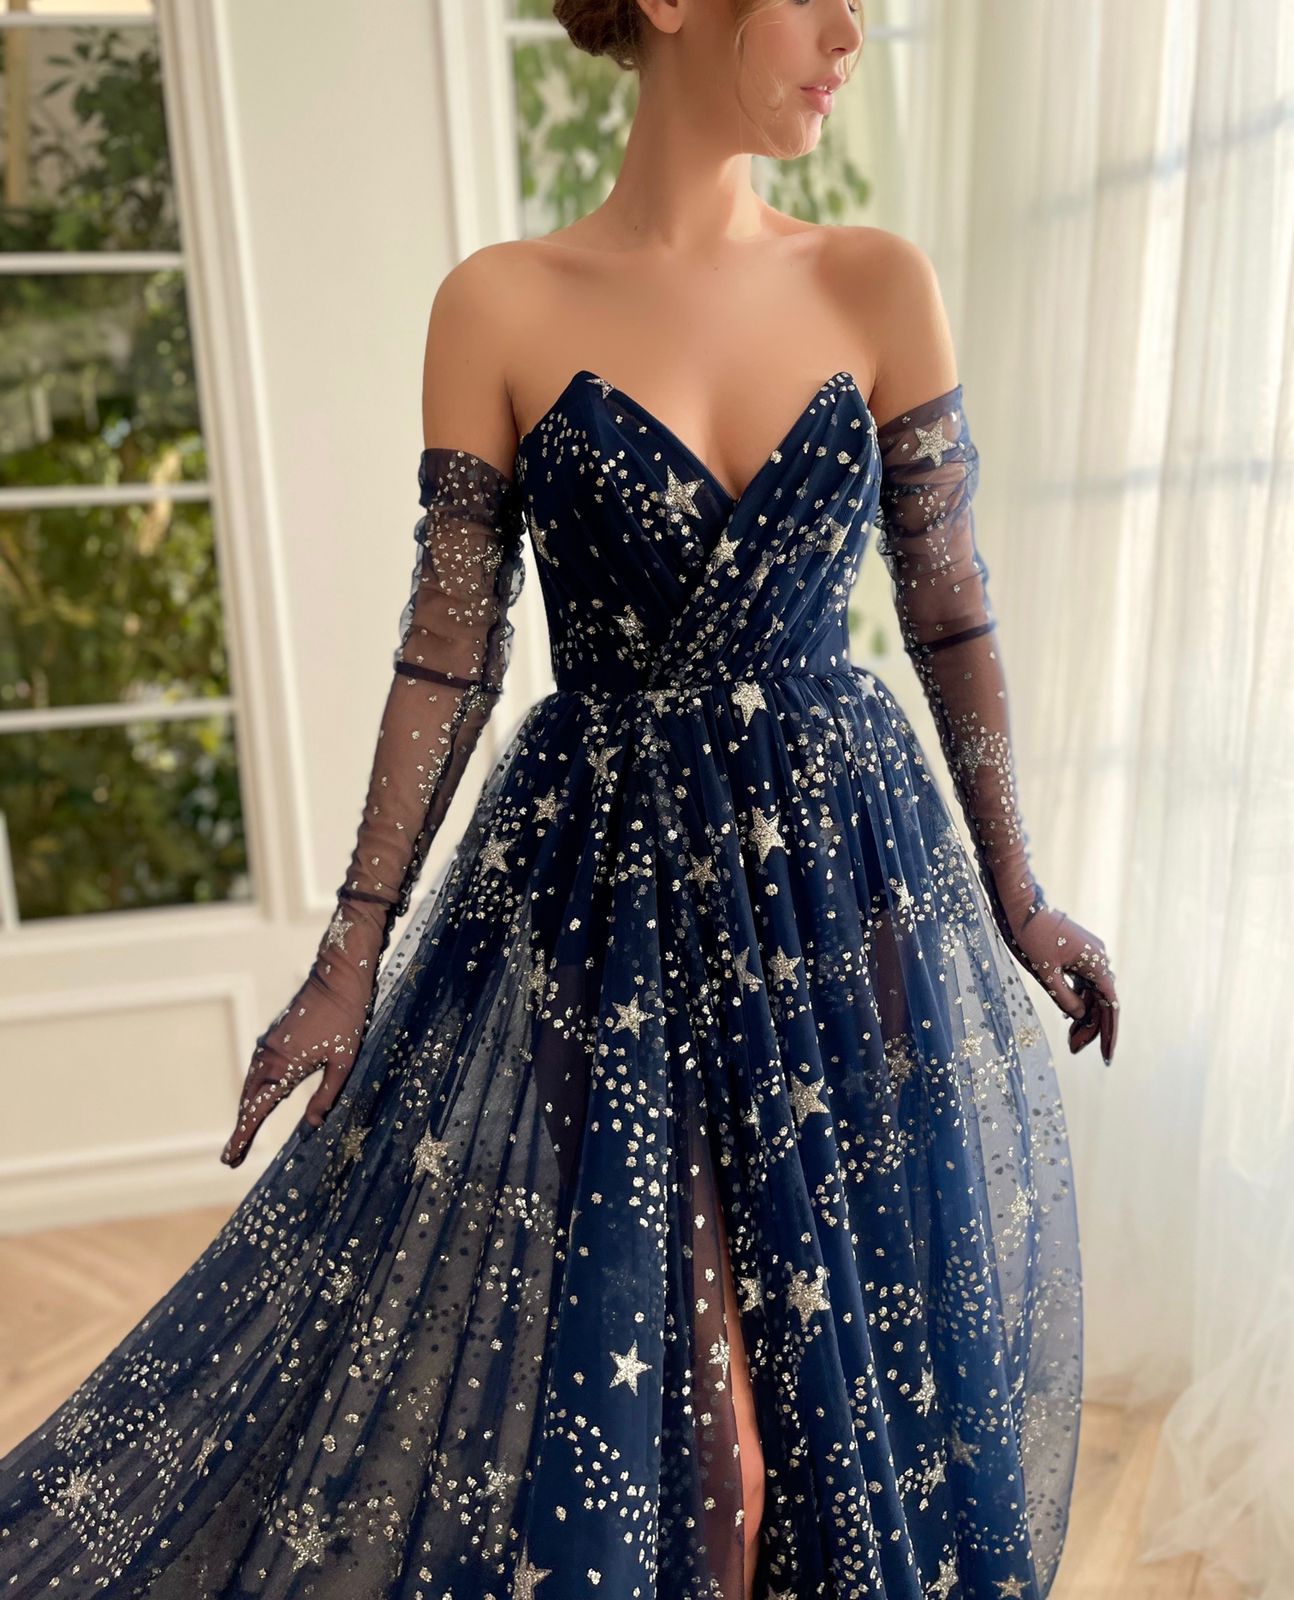 Blue A-Line dress with no sleeves, gloves and starry fabric